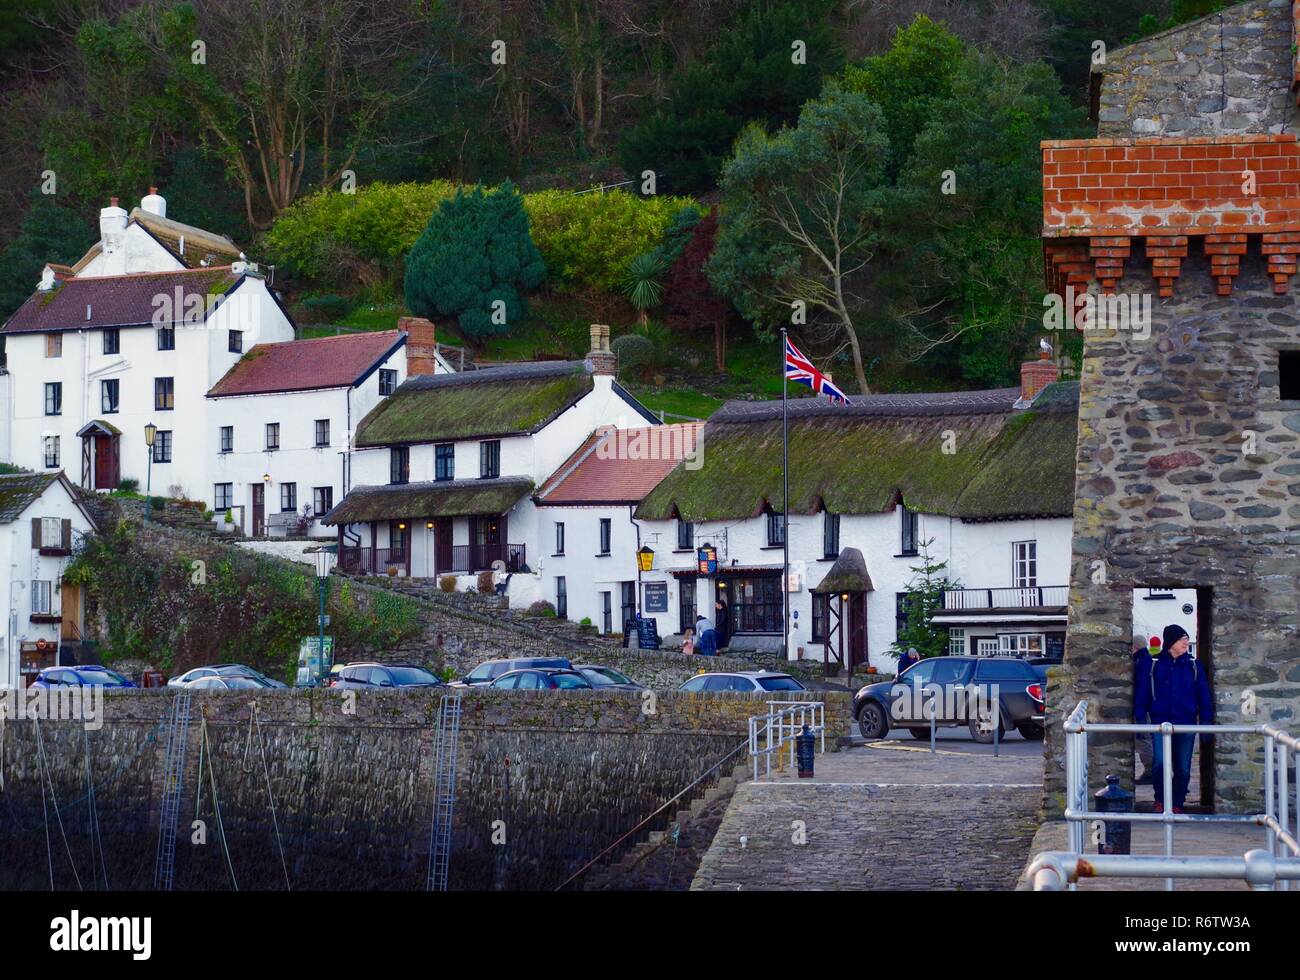 Rhenish Tower On The Pier At Lynmouth Harbour By The Thatched